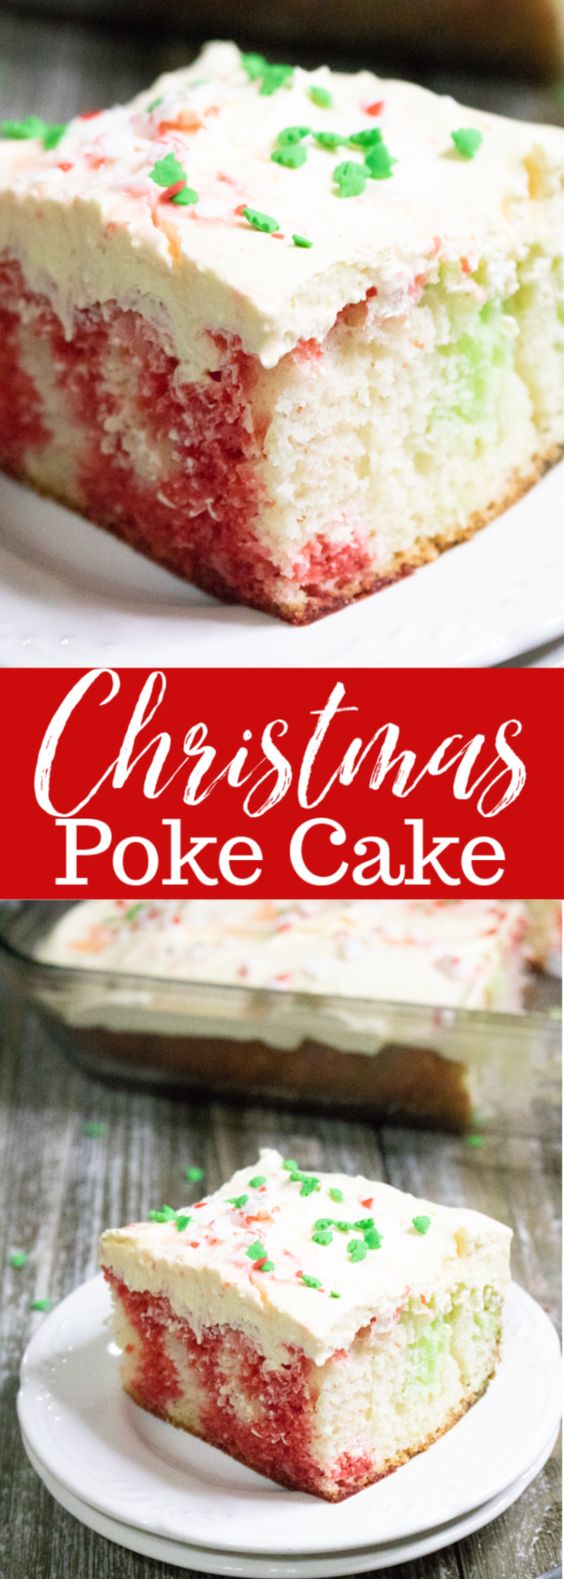 Christmas Poke Cake Recipes - Best Recipes Collection ...